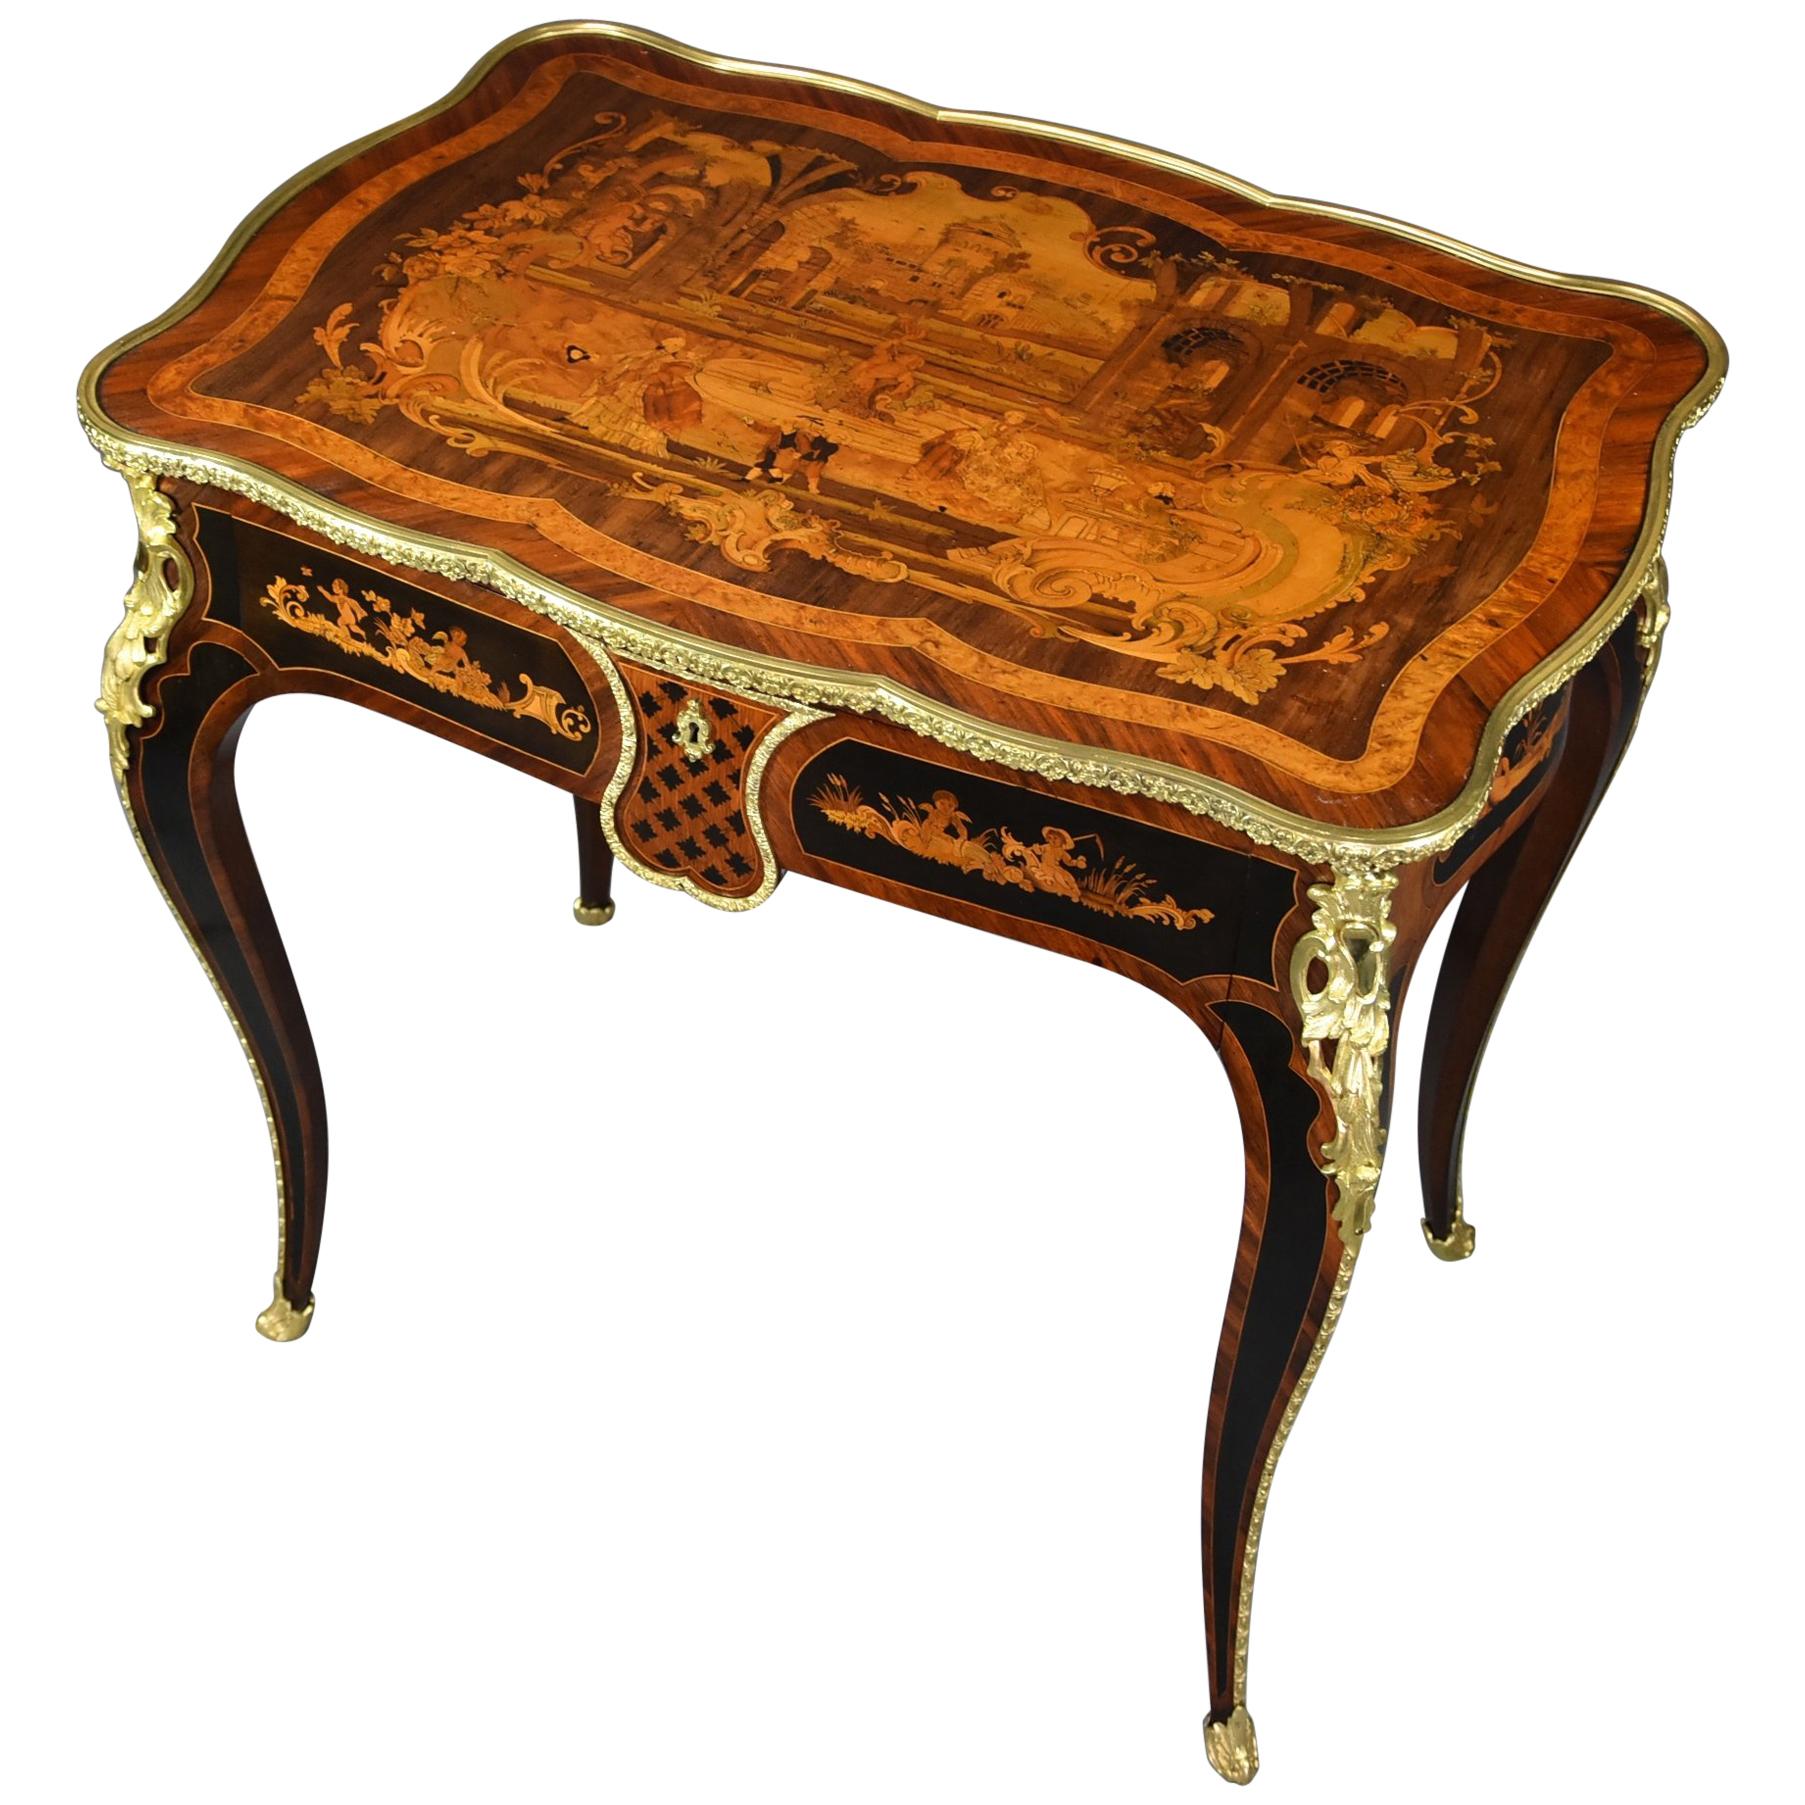 Mid-19th Century, French Fine Quality Kingwood Inlaid Centre Table For Sale